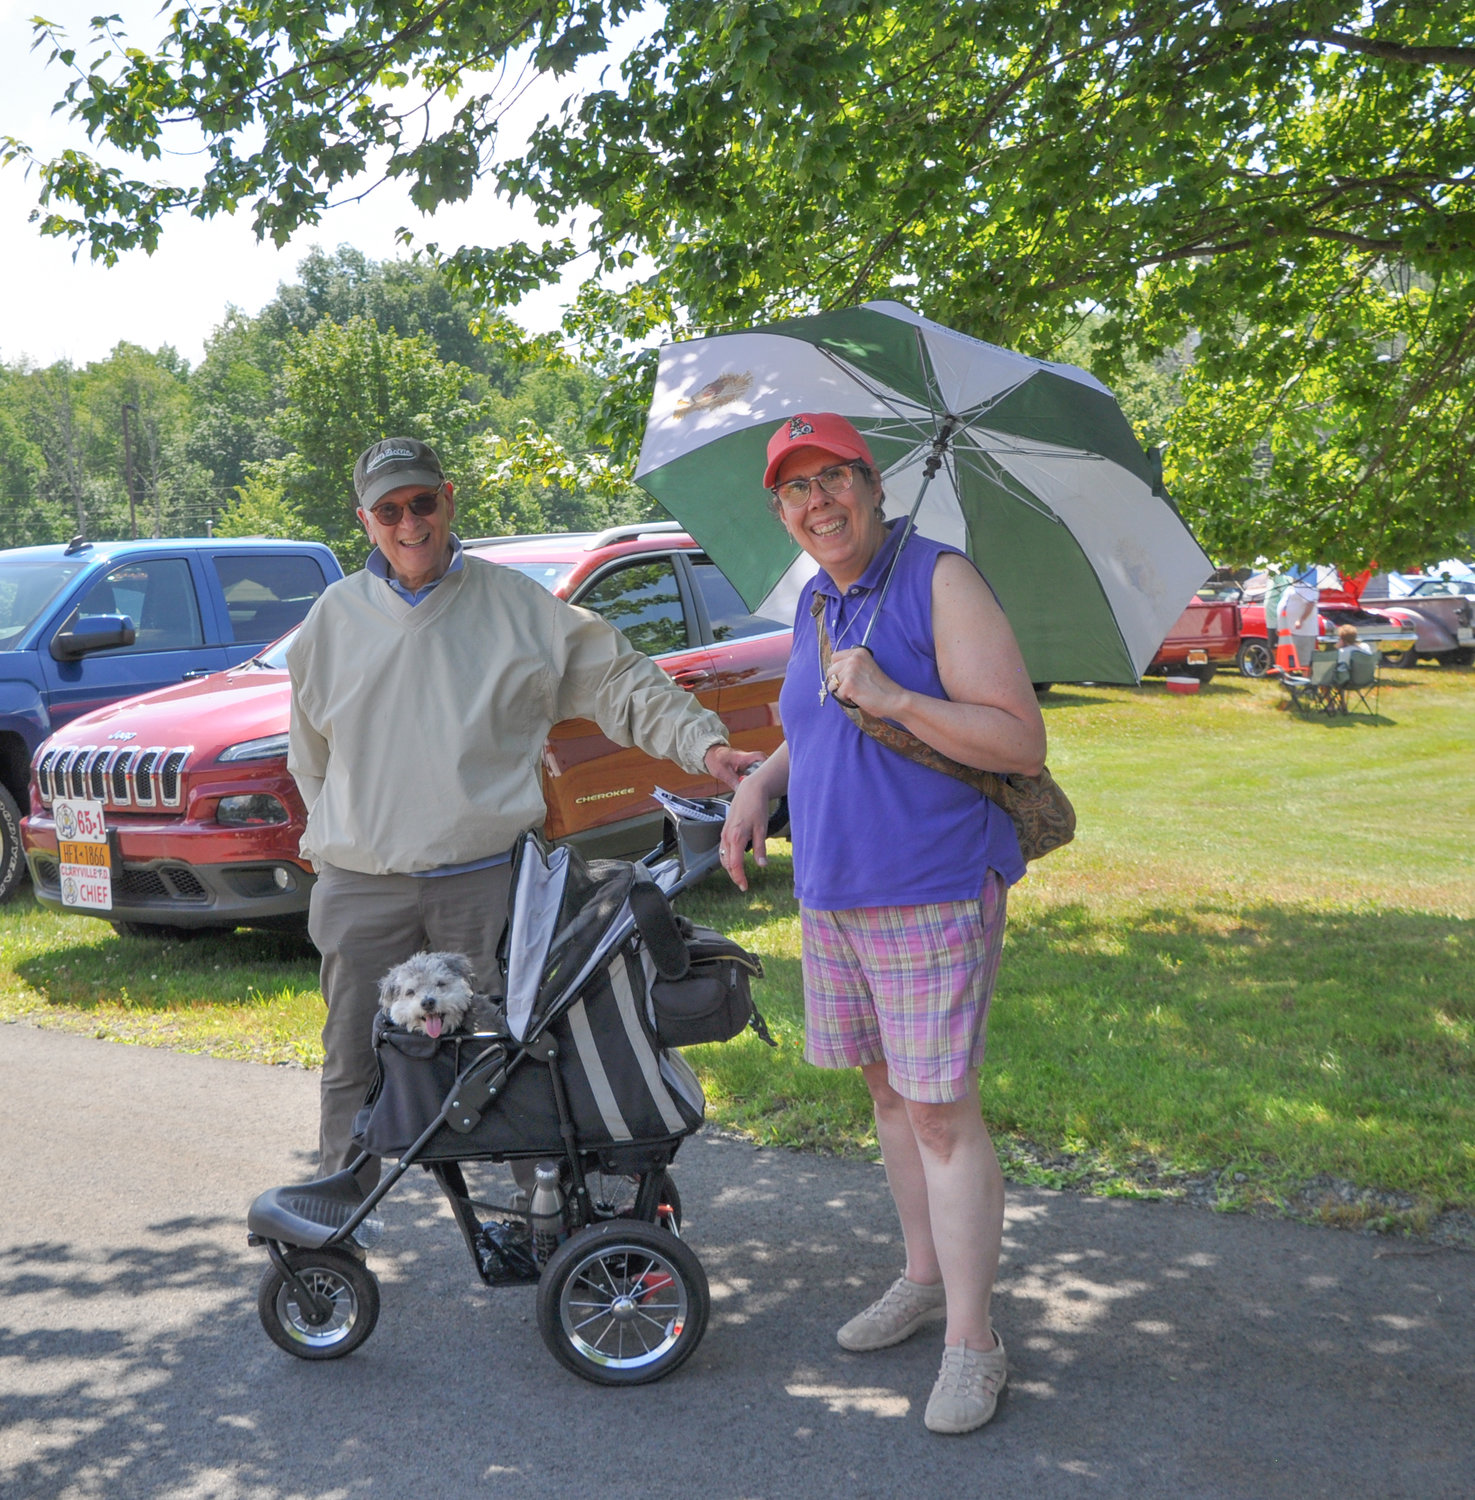 Cousin Andy, his wife Nancy and I met  up in Loch Sheldrake, where we cruised and schmoozed, with Dharma along in her stroller. (Don’t judge!)